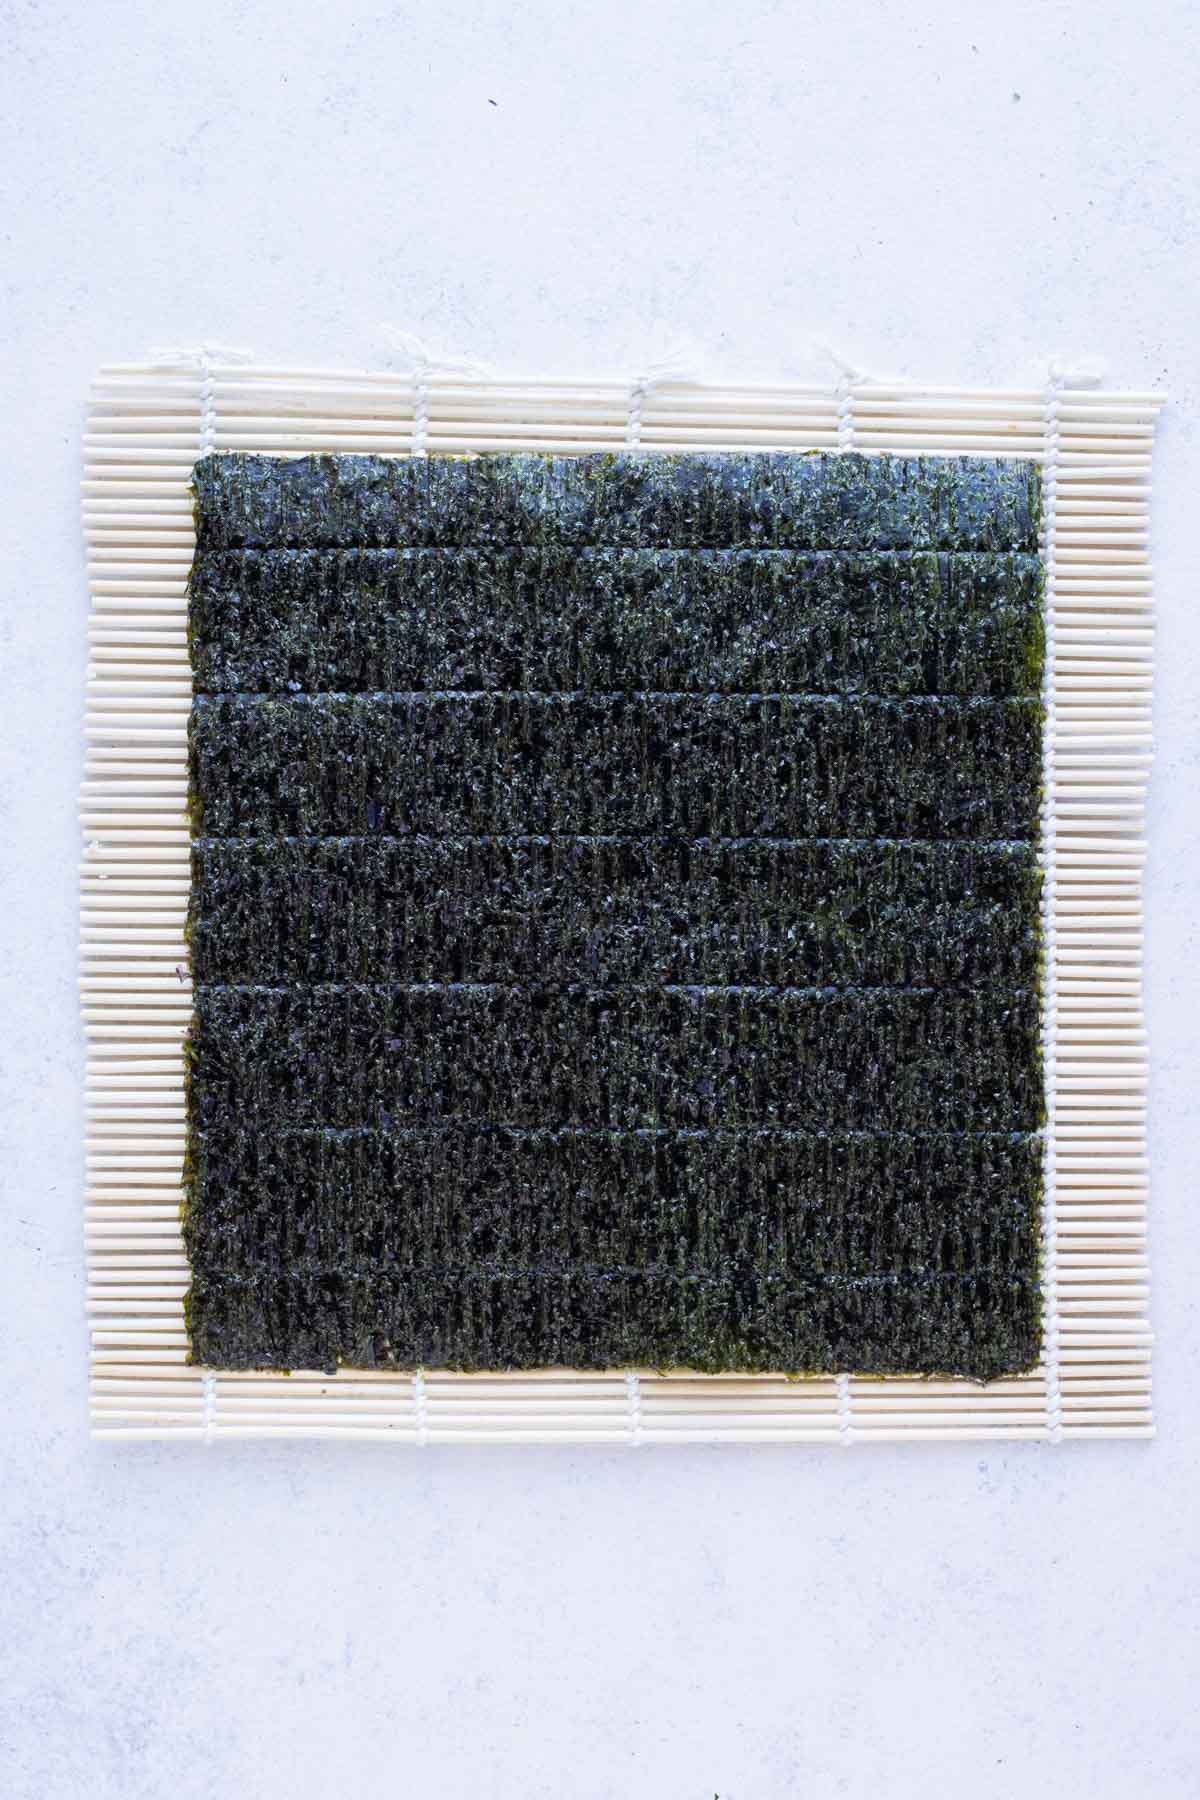 Seaweed is laid on a bamboo mat.